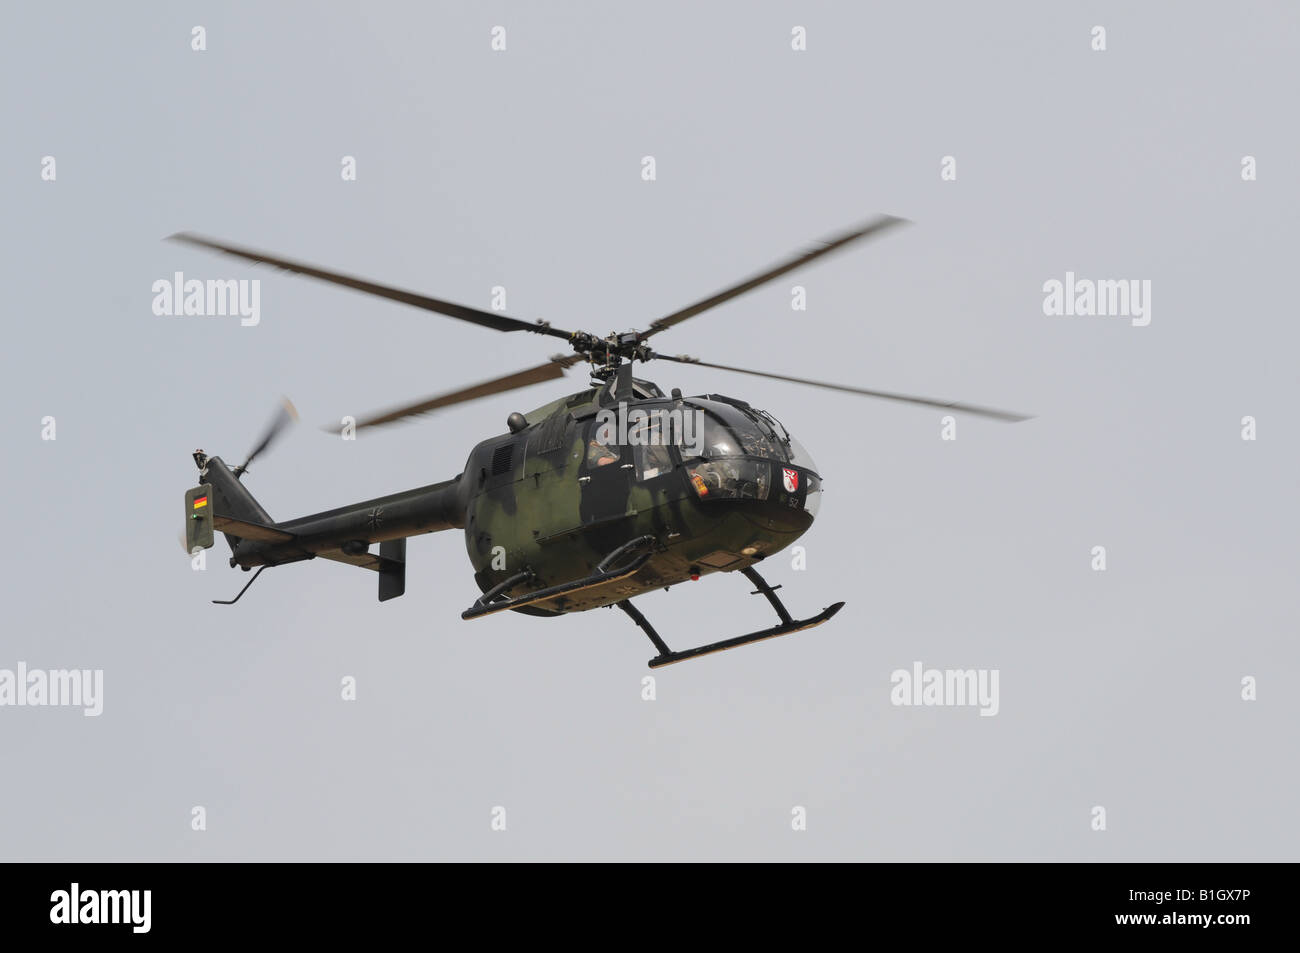 A german MBB Bo 105 army helicopter (Eurocopter EC 135) Stock Photo